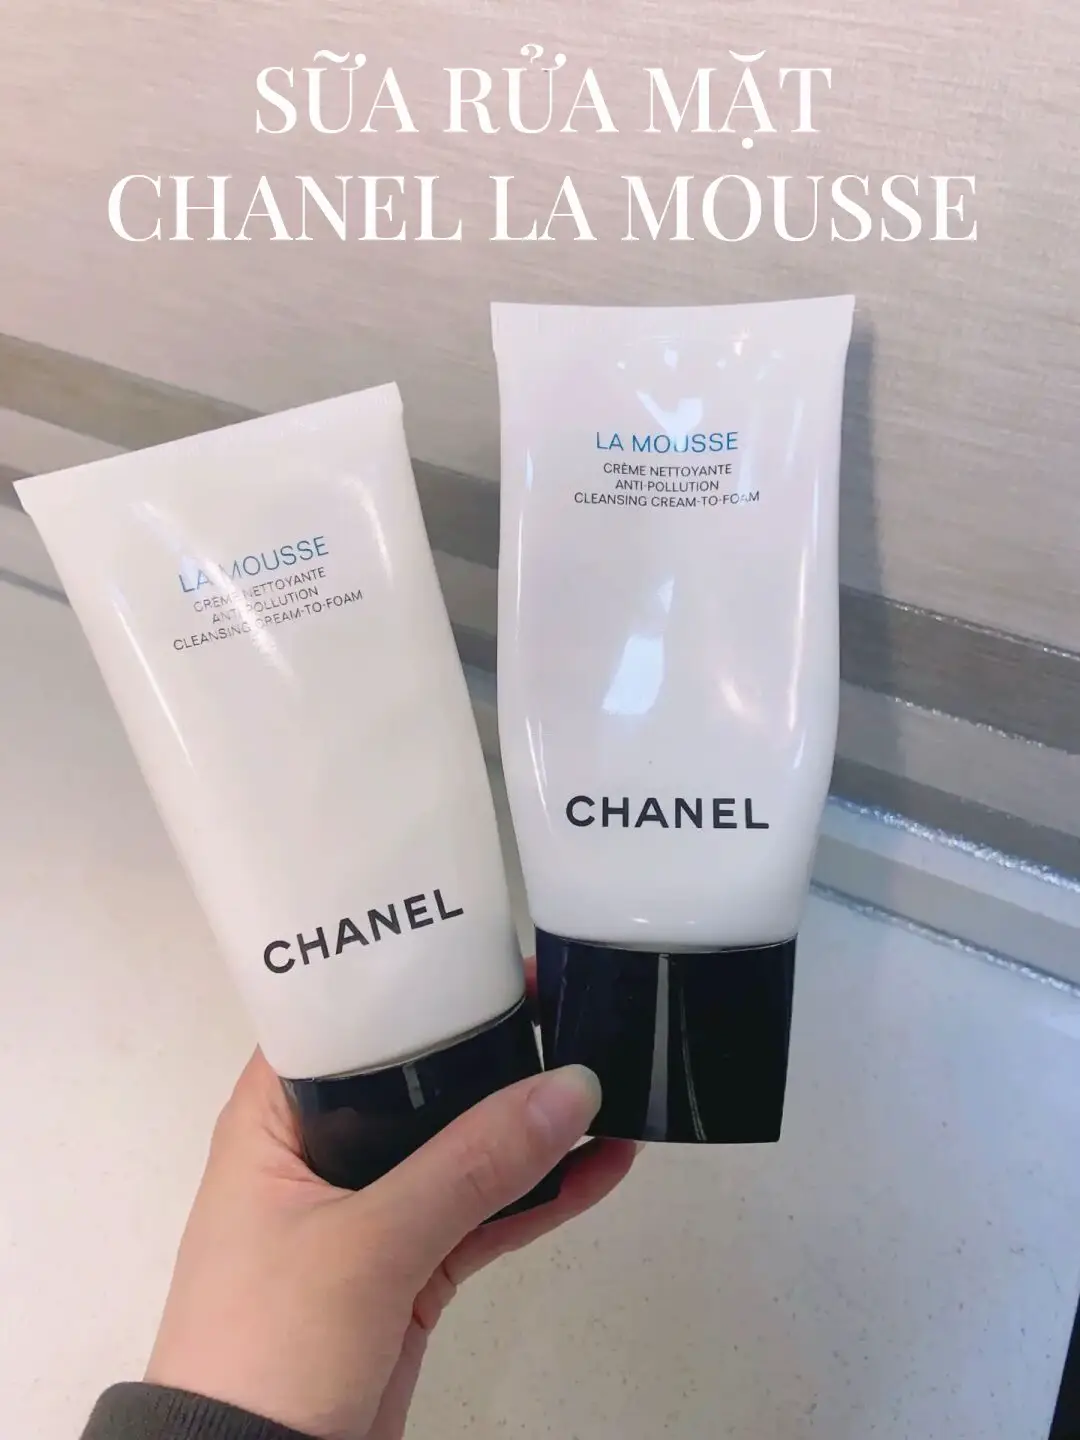 Sữa rửa mặt Chanel La Mousse, Gallery posted by Lynh17_